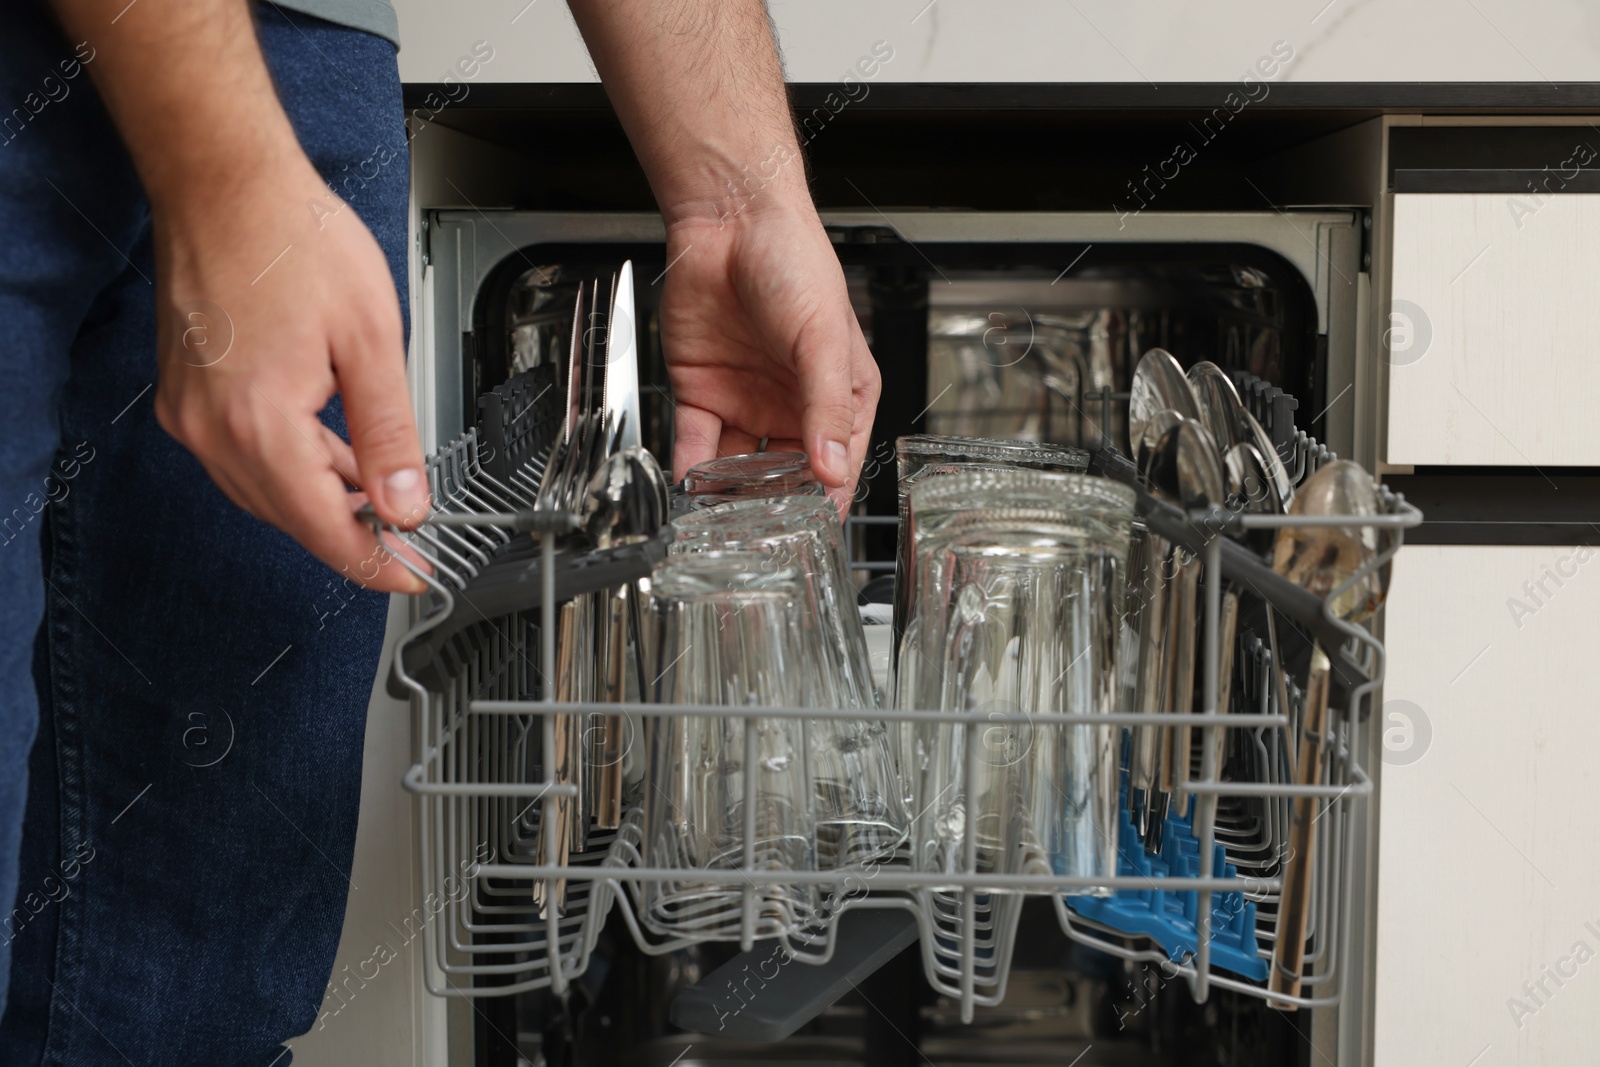 Photo of Man loading dishwasher with glass and cutlery indoors, closeup